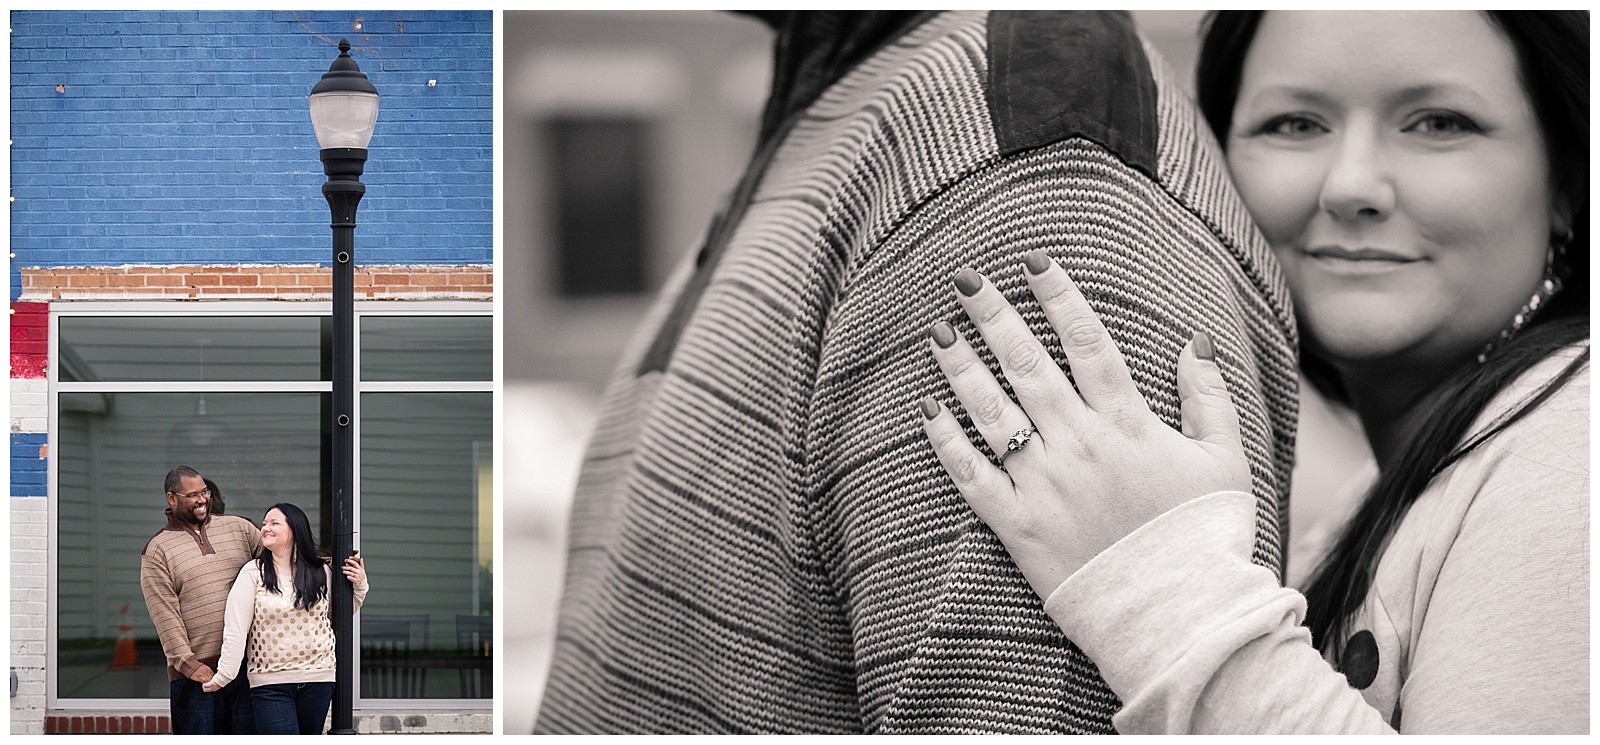 An engagement session in Downtown Lee's Summit.